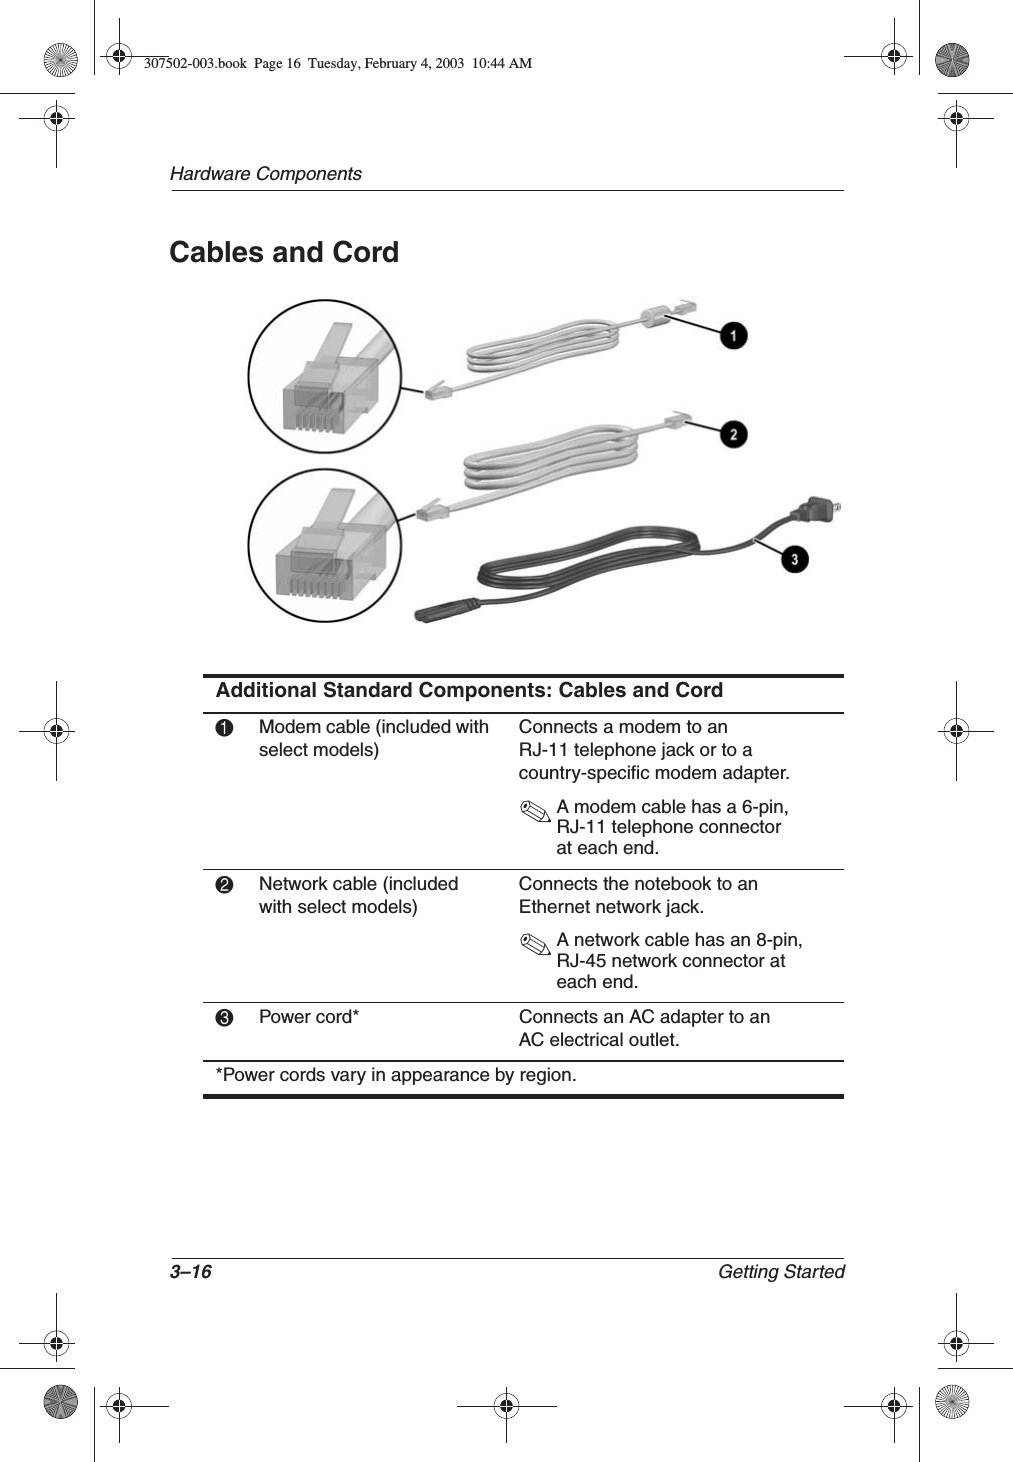 3–16 Getting StartedHardware ComponentsCables and CordAdditional Standard Components: Cables and Cord1Modem cable (included with select models)Connects a modem to an RJ-11 telephone jack or to a country-specific modem adapter.✎A modem cable has a 6-pin, RJ-11 telephone connector at each end.2Network cable (included with select models)Connects the notebook to an Ethernet network jack.✎A network cable has an 8-pin, RJ-45 network connector at each end.3Power cord* Connects an AC adapter to an AC electrical outlet.*Power cords vary in appearance by region.307502-003.book  Page 16  Tuesday, February 4, 2003  10:44 AM